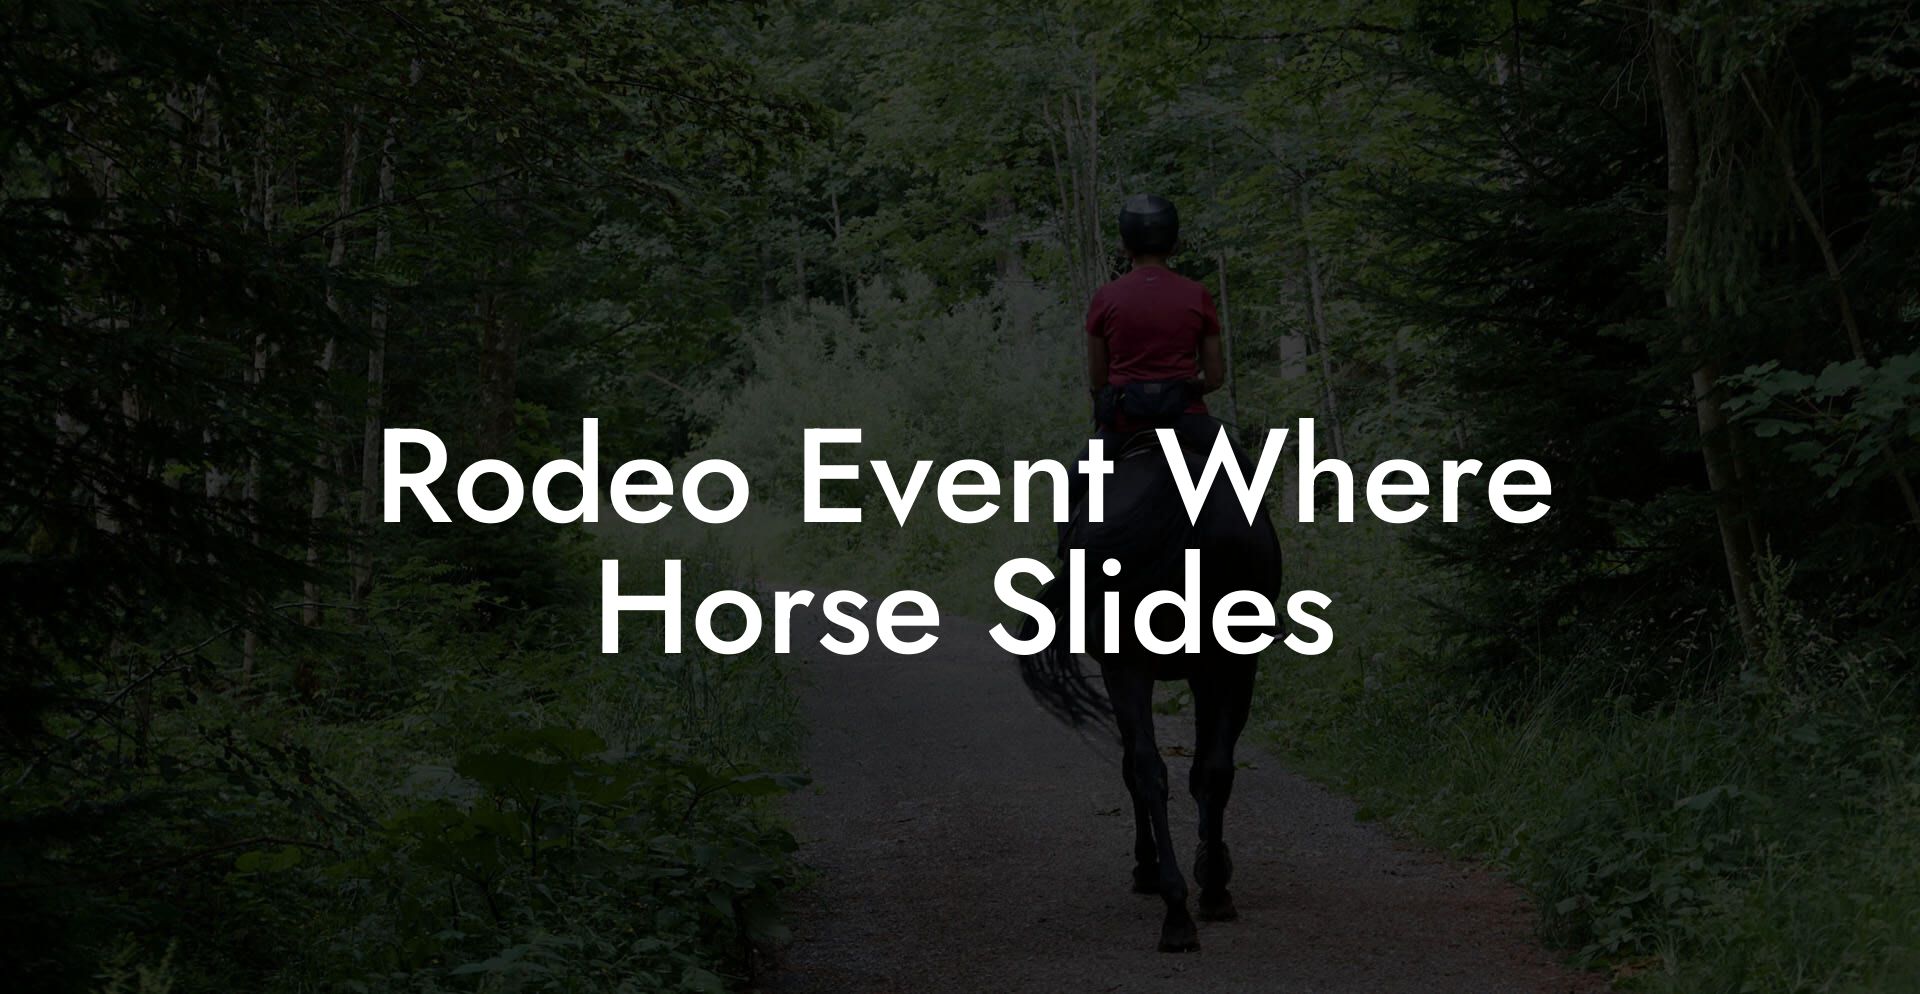 Rodeo Event Where Horse Slides